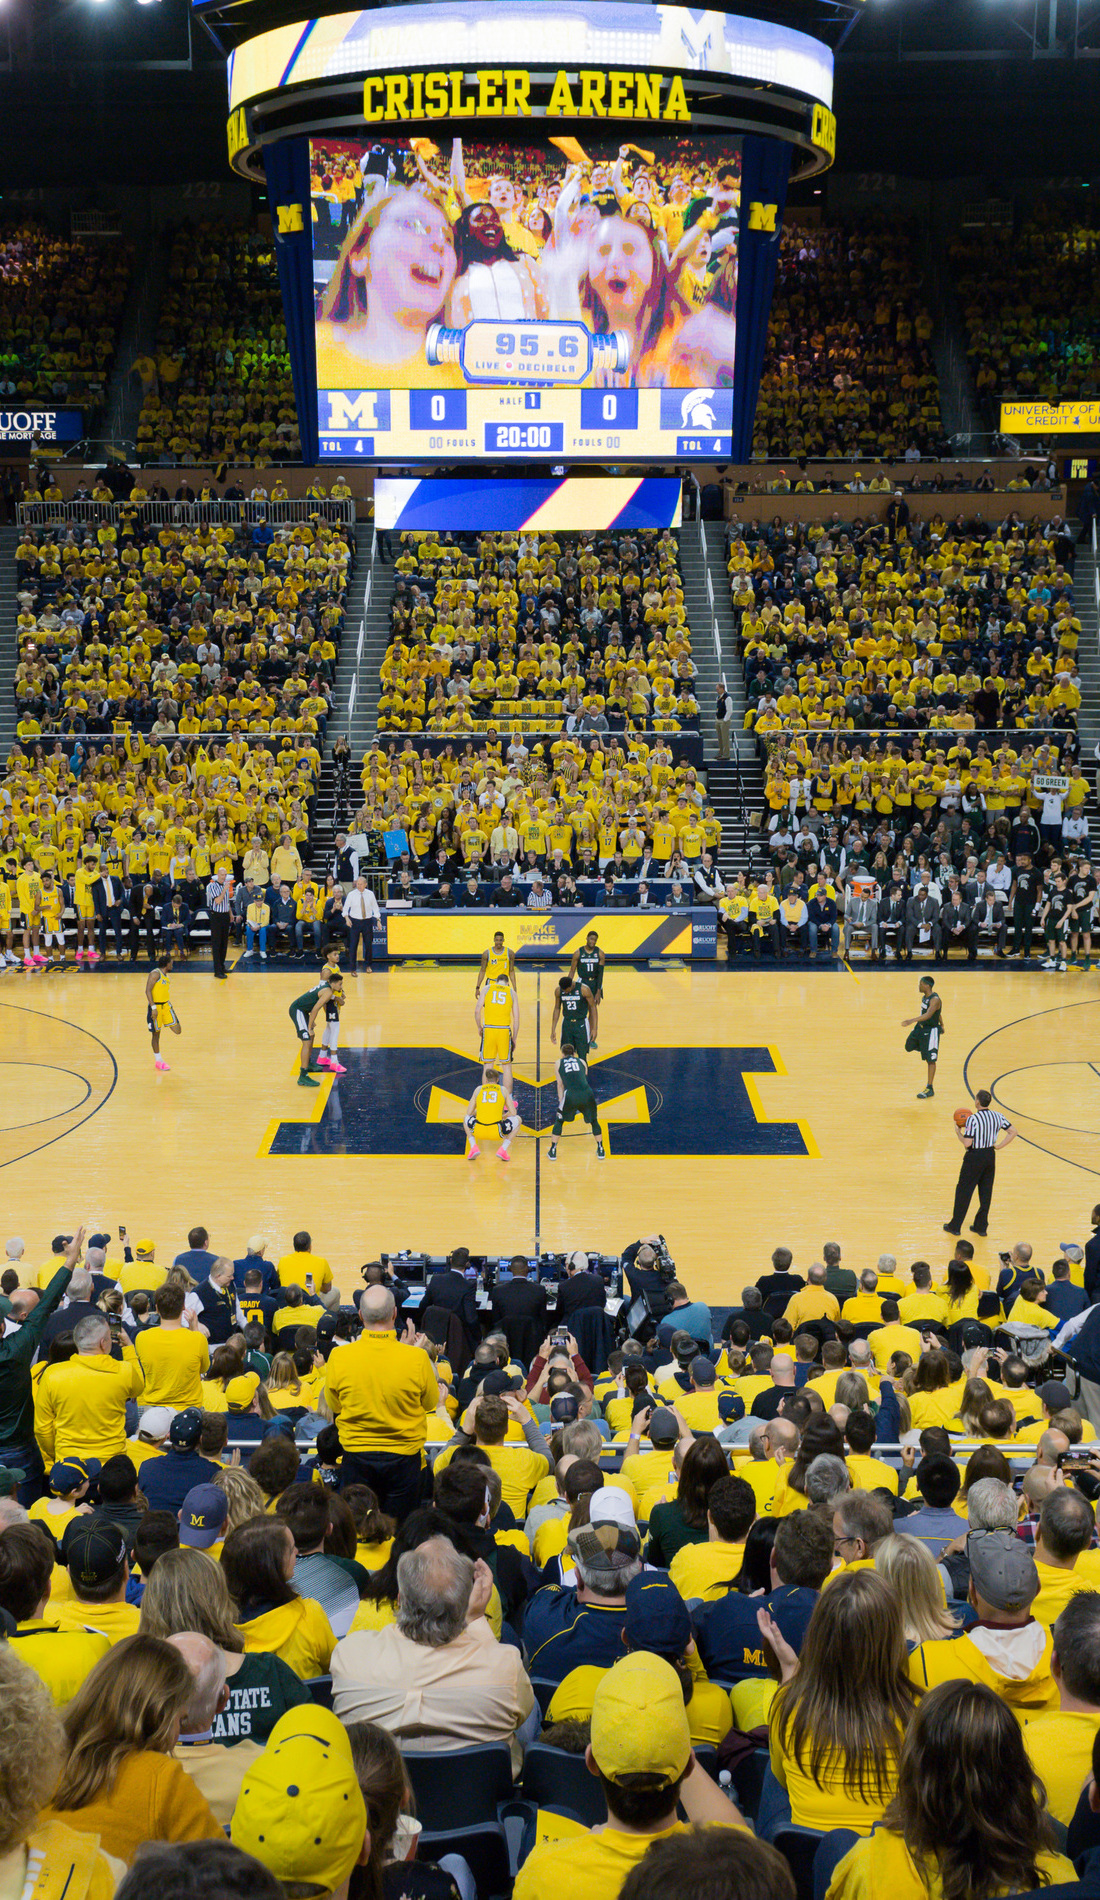 A Michigan Wolverines Basketball live event